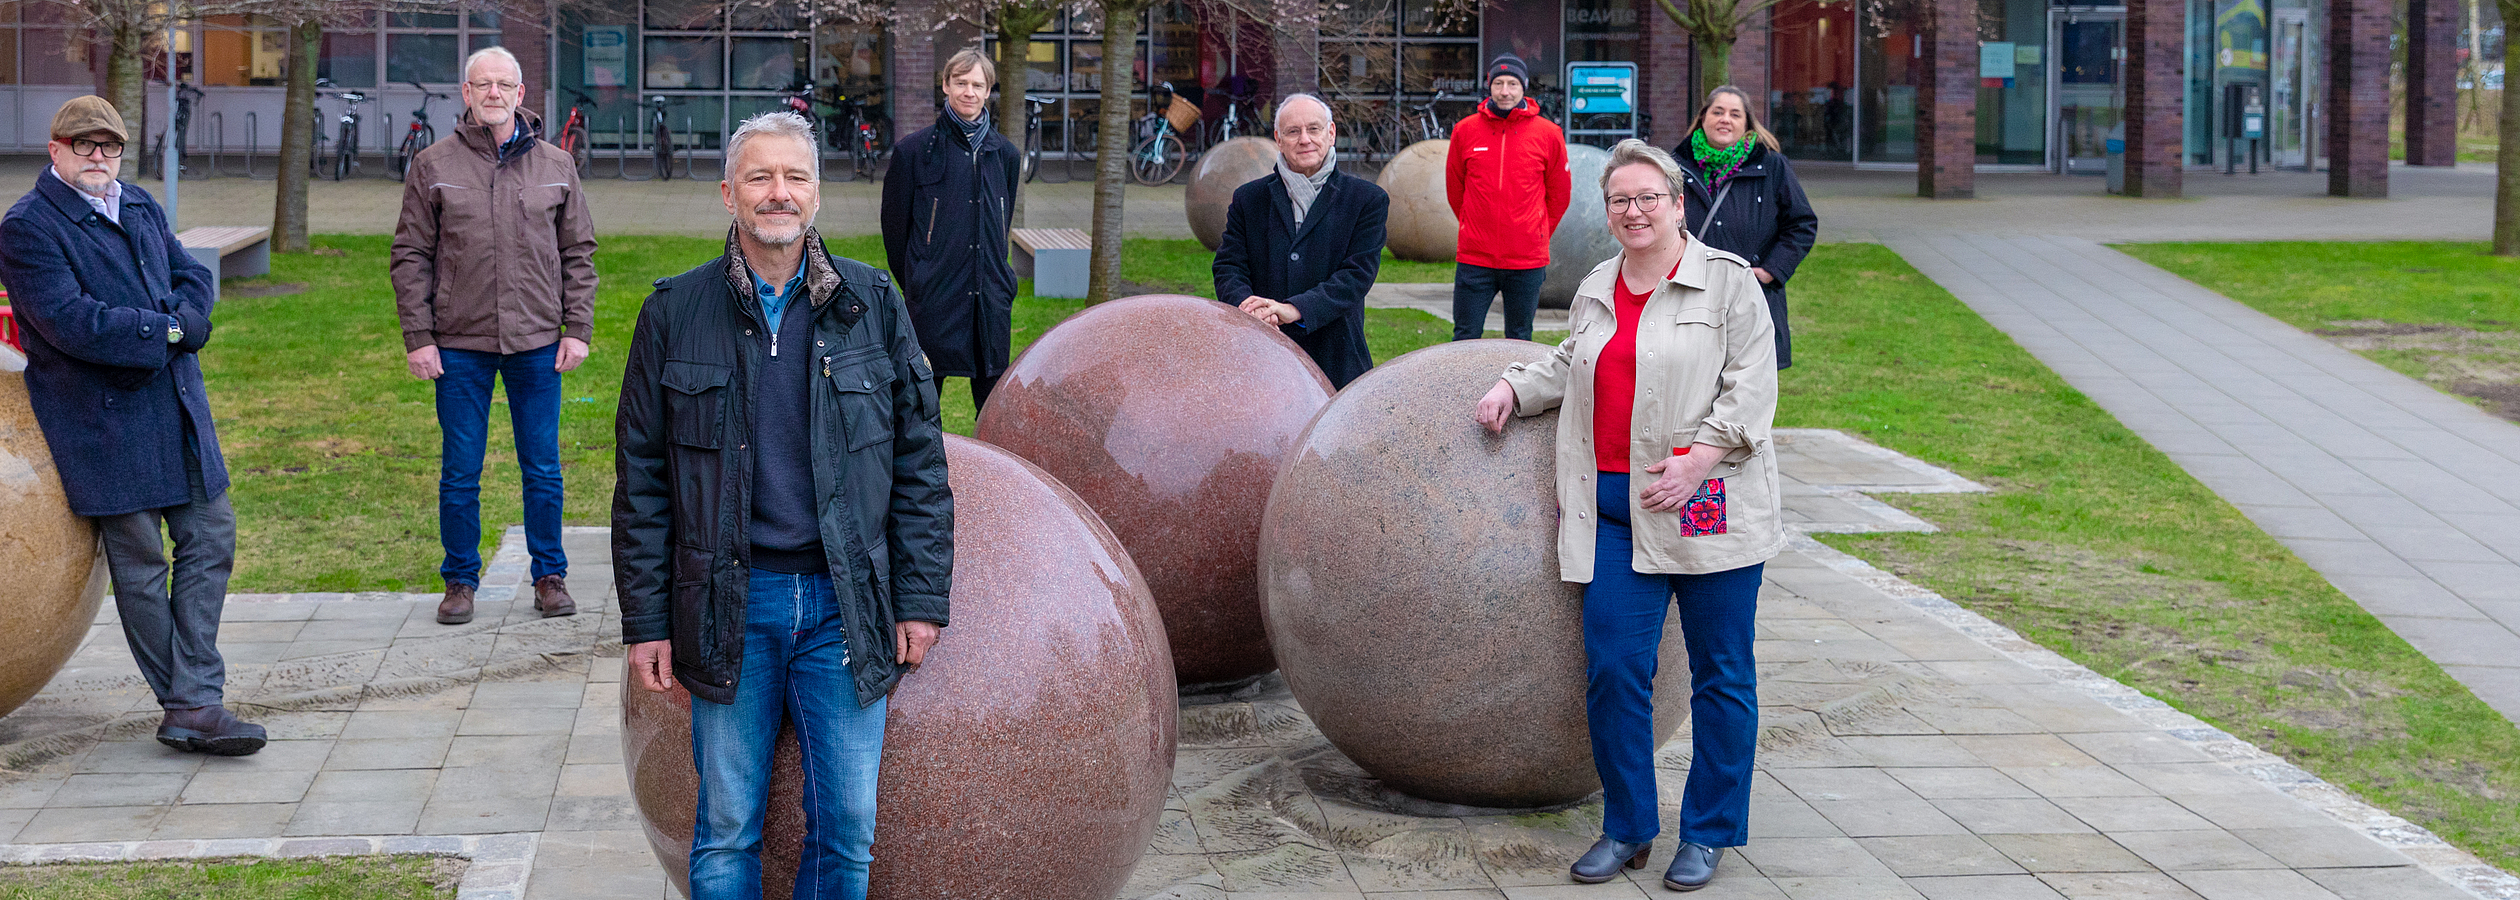 They all contributed to the fact that the new piece of art is now located on the University of Bremen campus (from the left): architect Jens Behnken-Mross (university), Stephan Lauck (Trümper&Wessels construction company), Thomas Flege (Uiberall Foundation), Dr. Ingmar Lähnemann (Bremen Cultural Department), Administrative Department Head Hans-Joachim Orlok (university), Wilhelm Petry (Bremen City development team), University Director of Finance and Administration Frauke Meyer, and Nicole Nowak (Bremen Cultural Department).